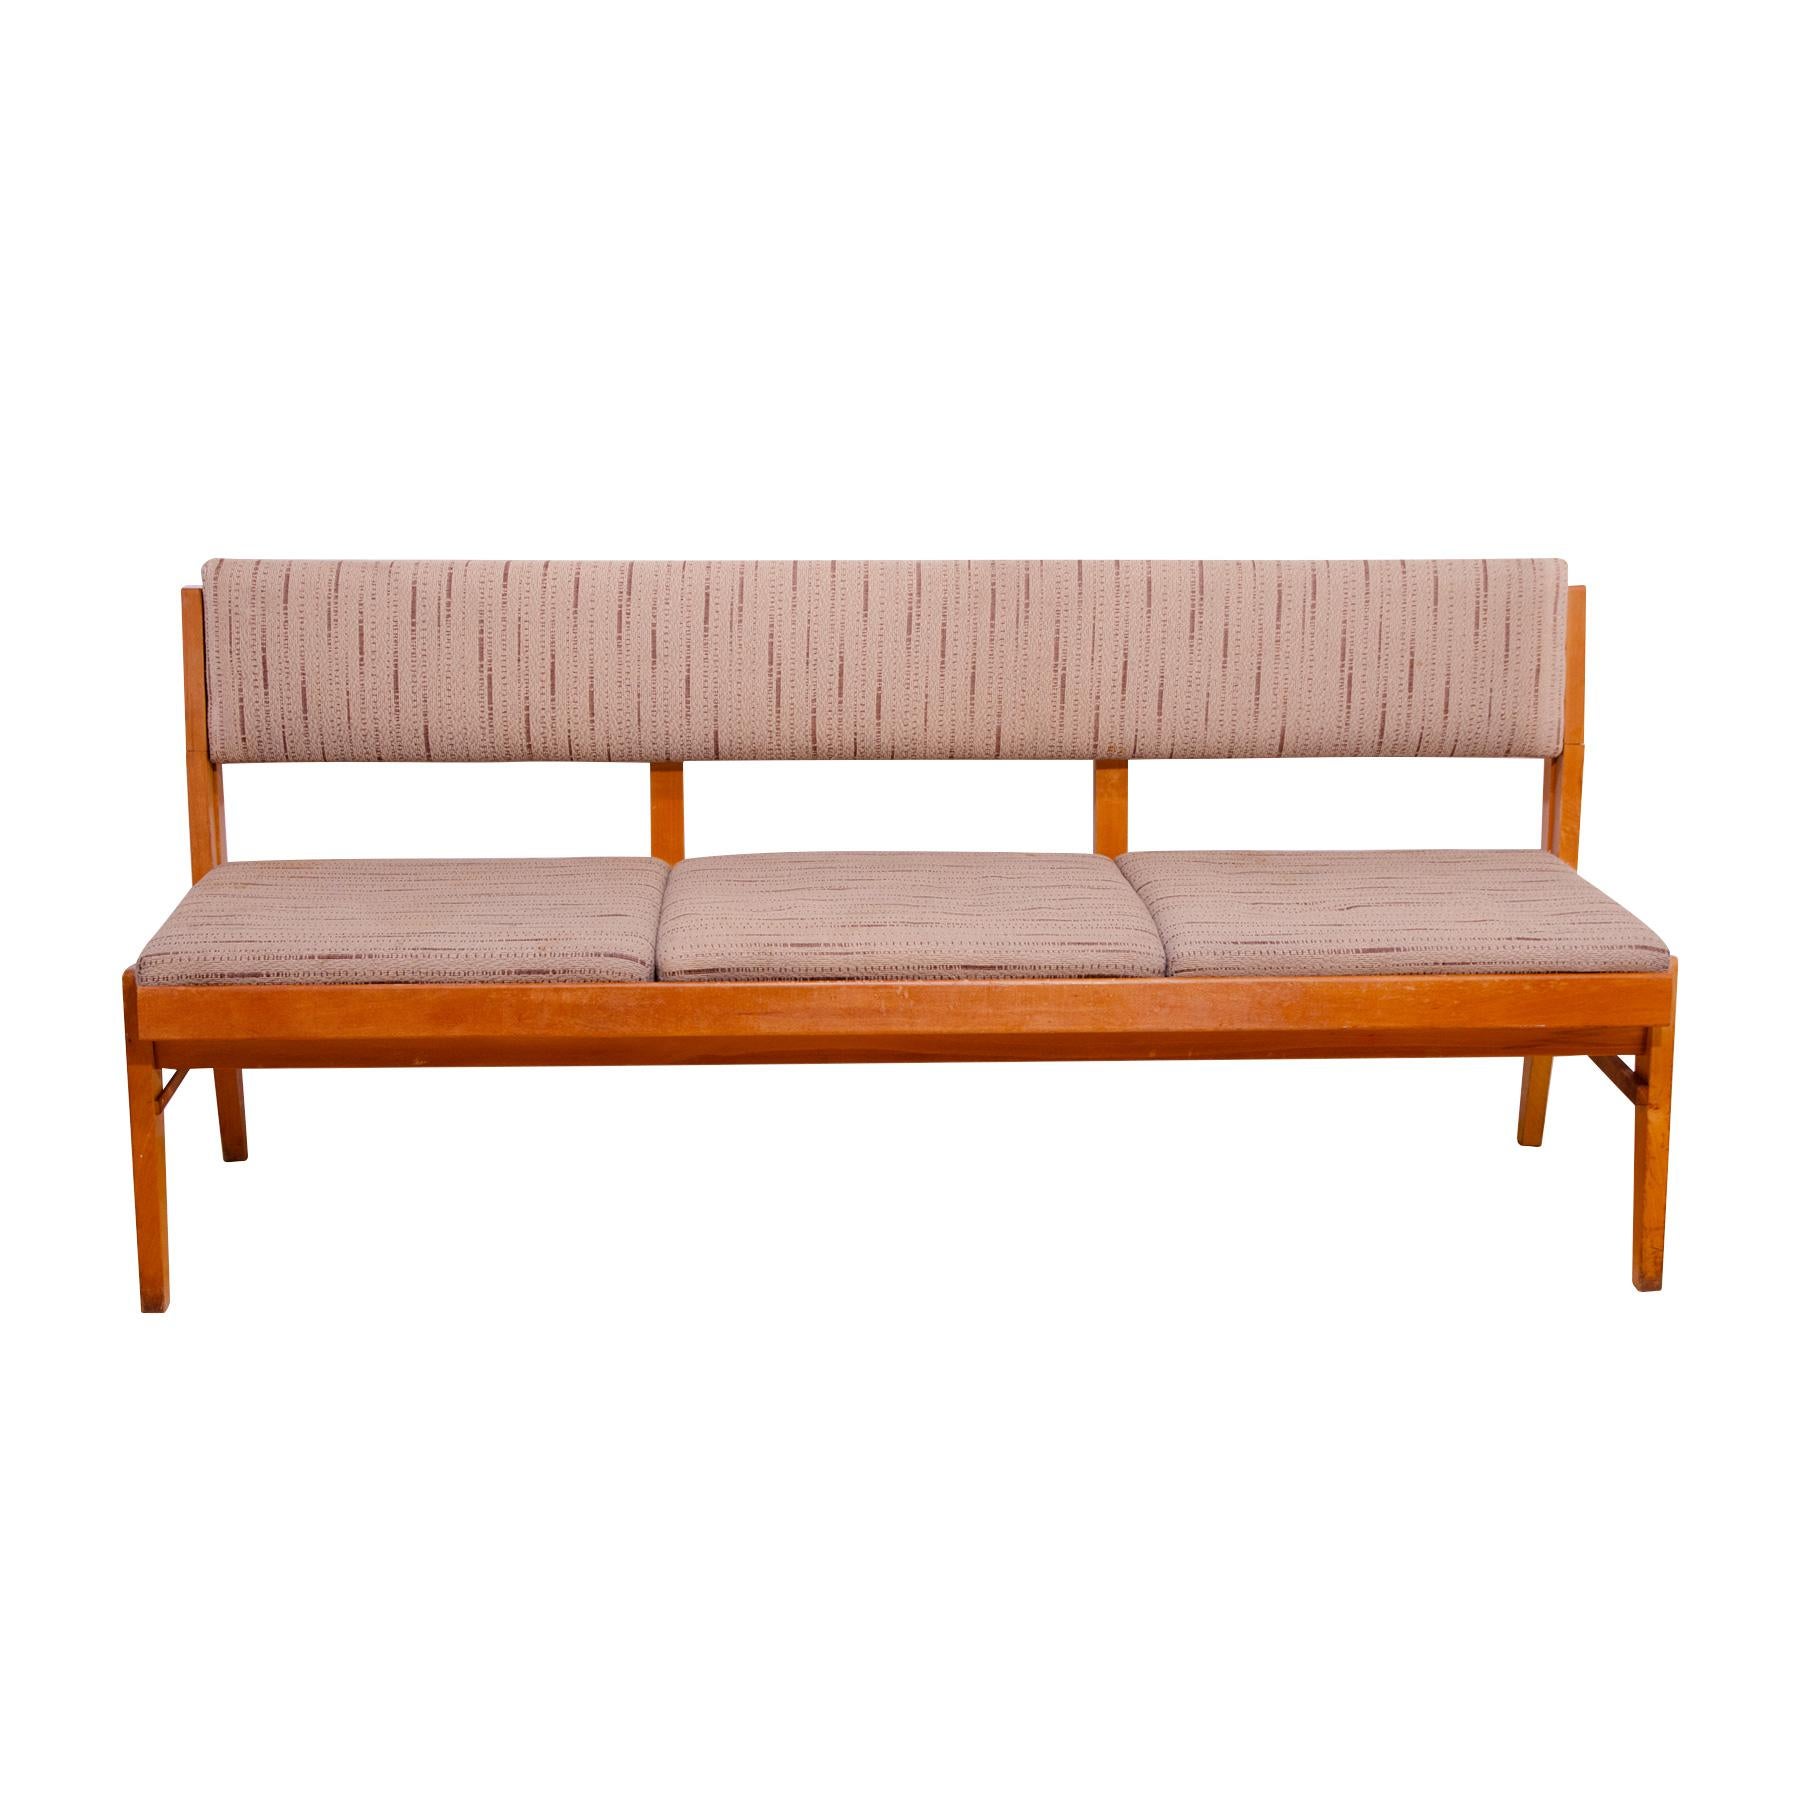 Very interesting mid century upholstered sofa/bench, made in the former Czechoslovakia in the 1960´s. Material: beech wood, fabric. The sofa is in very good Vintage condition.

Height: 84 cm

Lenght: 187 cm

Depth: 59 cm